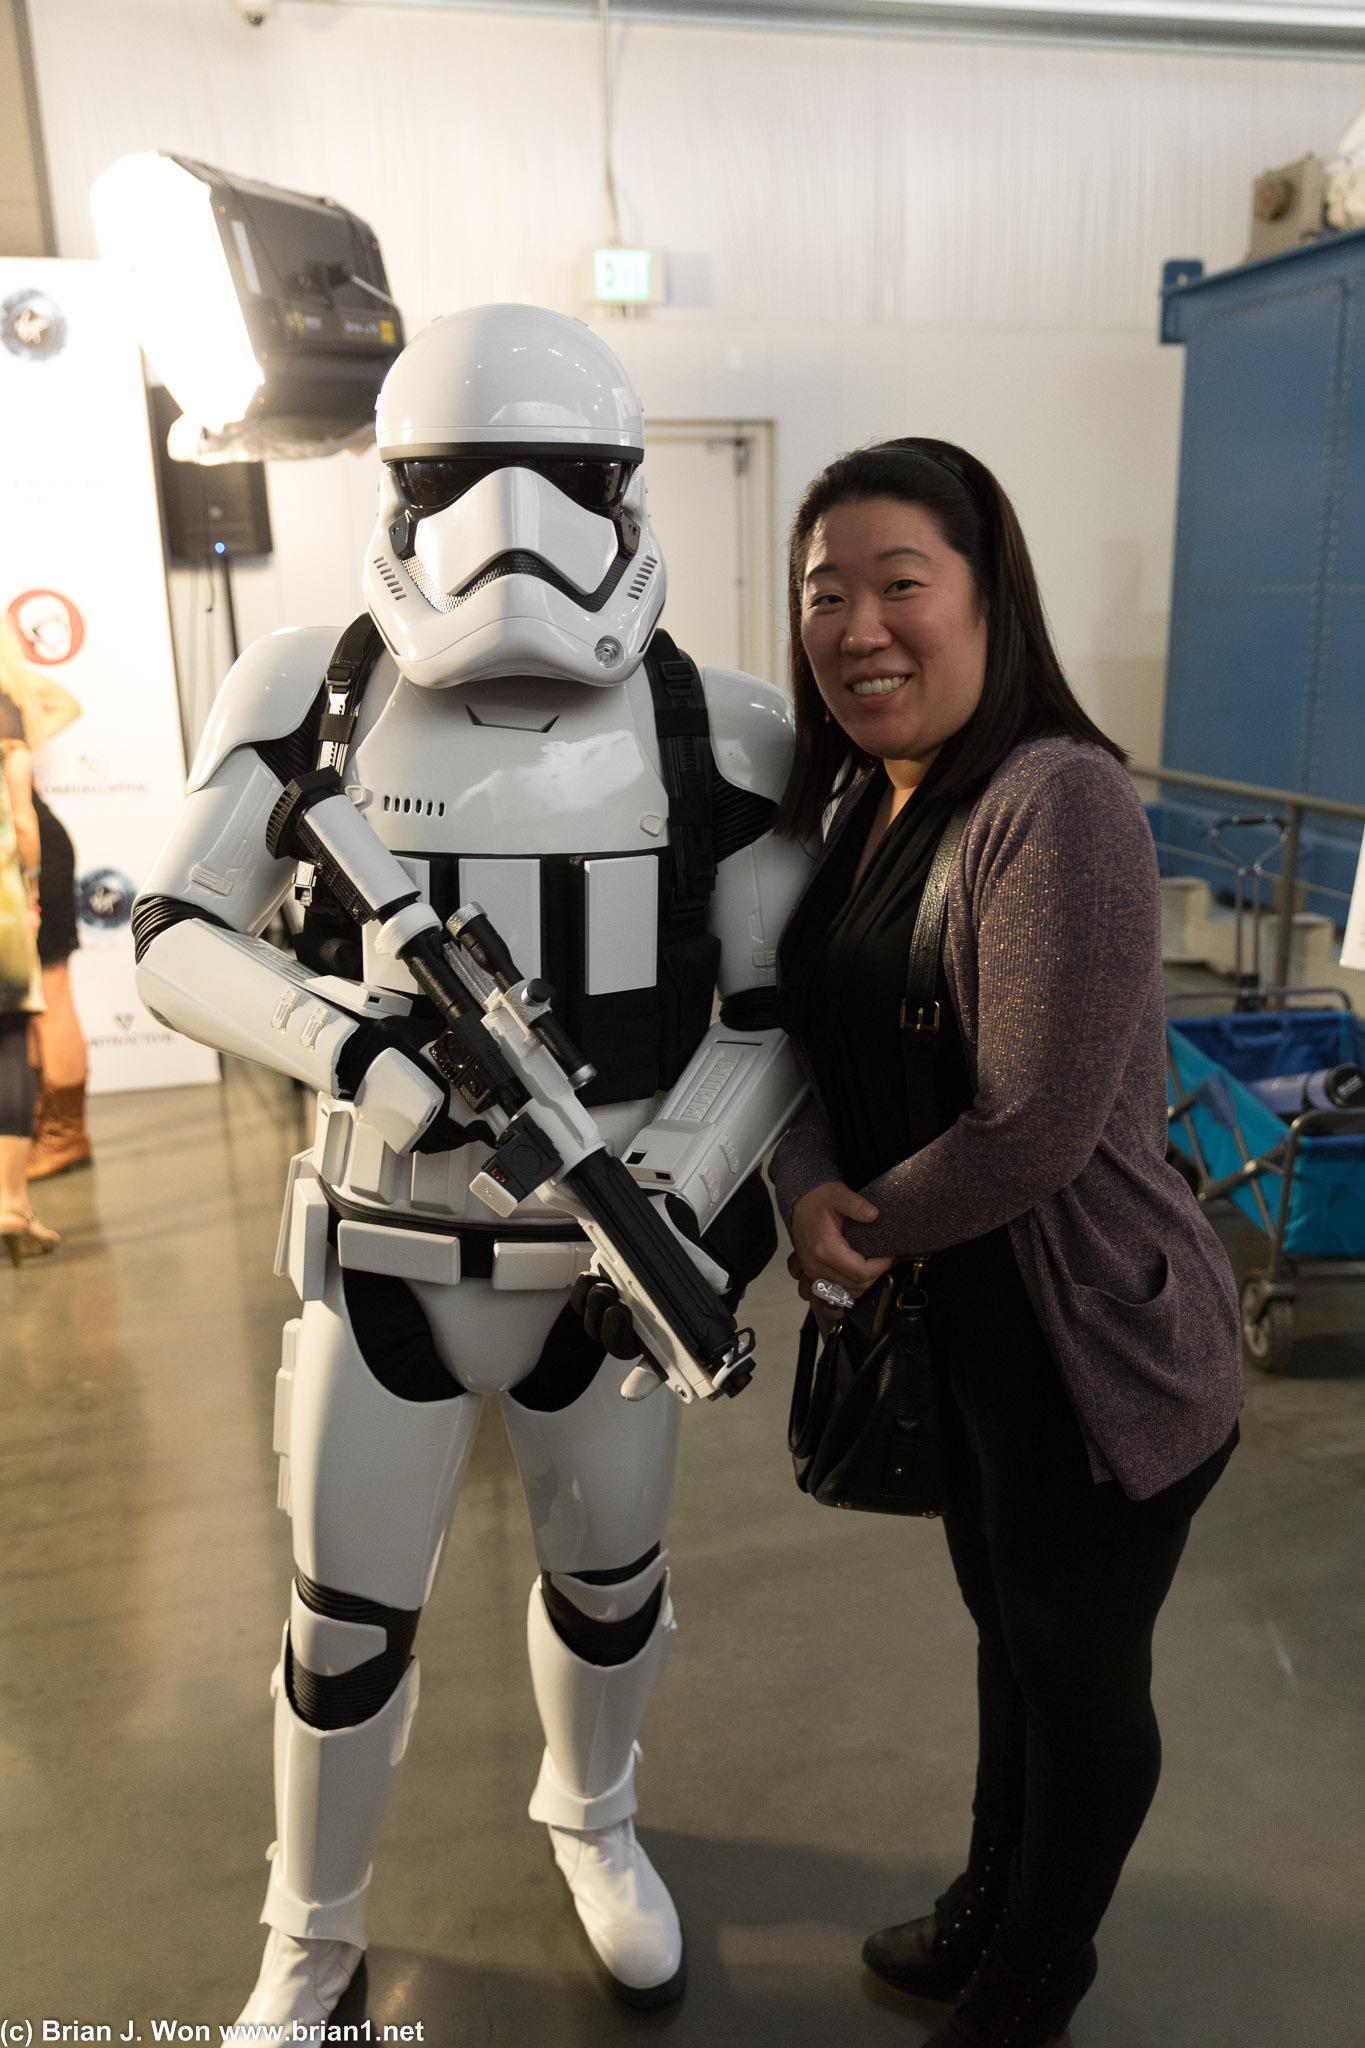 Ophelia poses with a First Order stormtrooper.